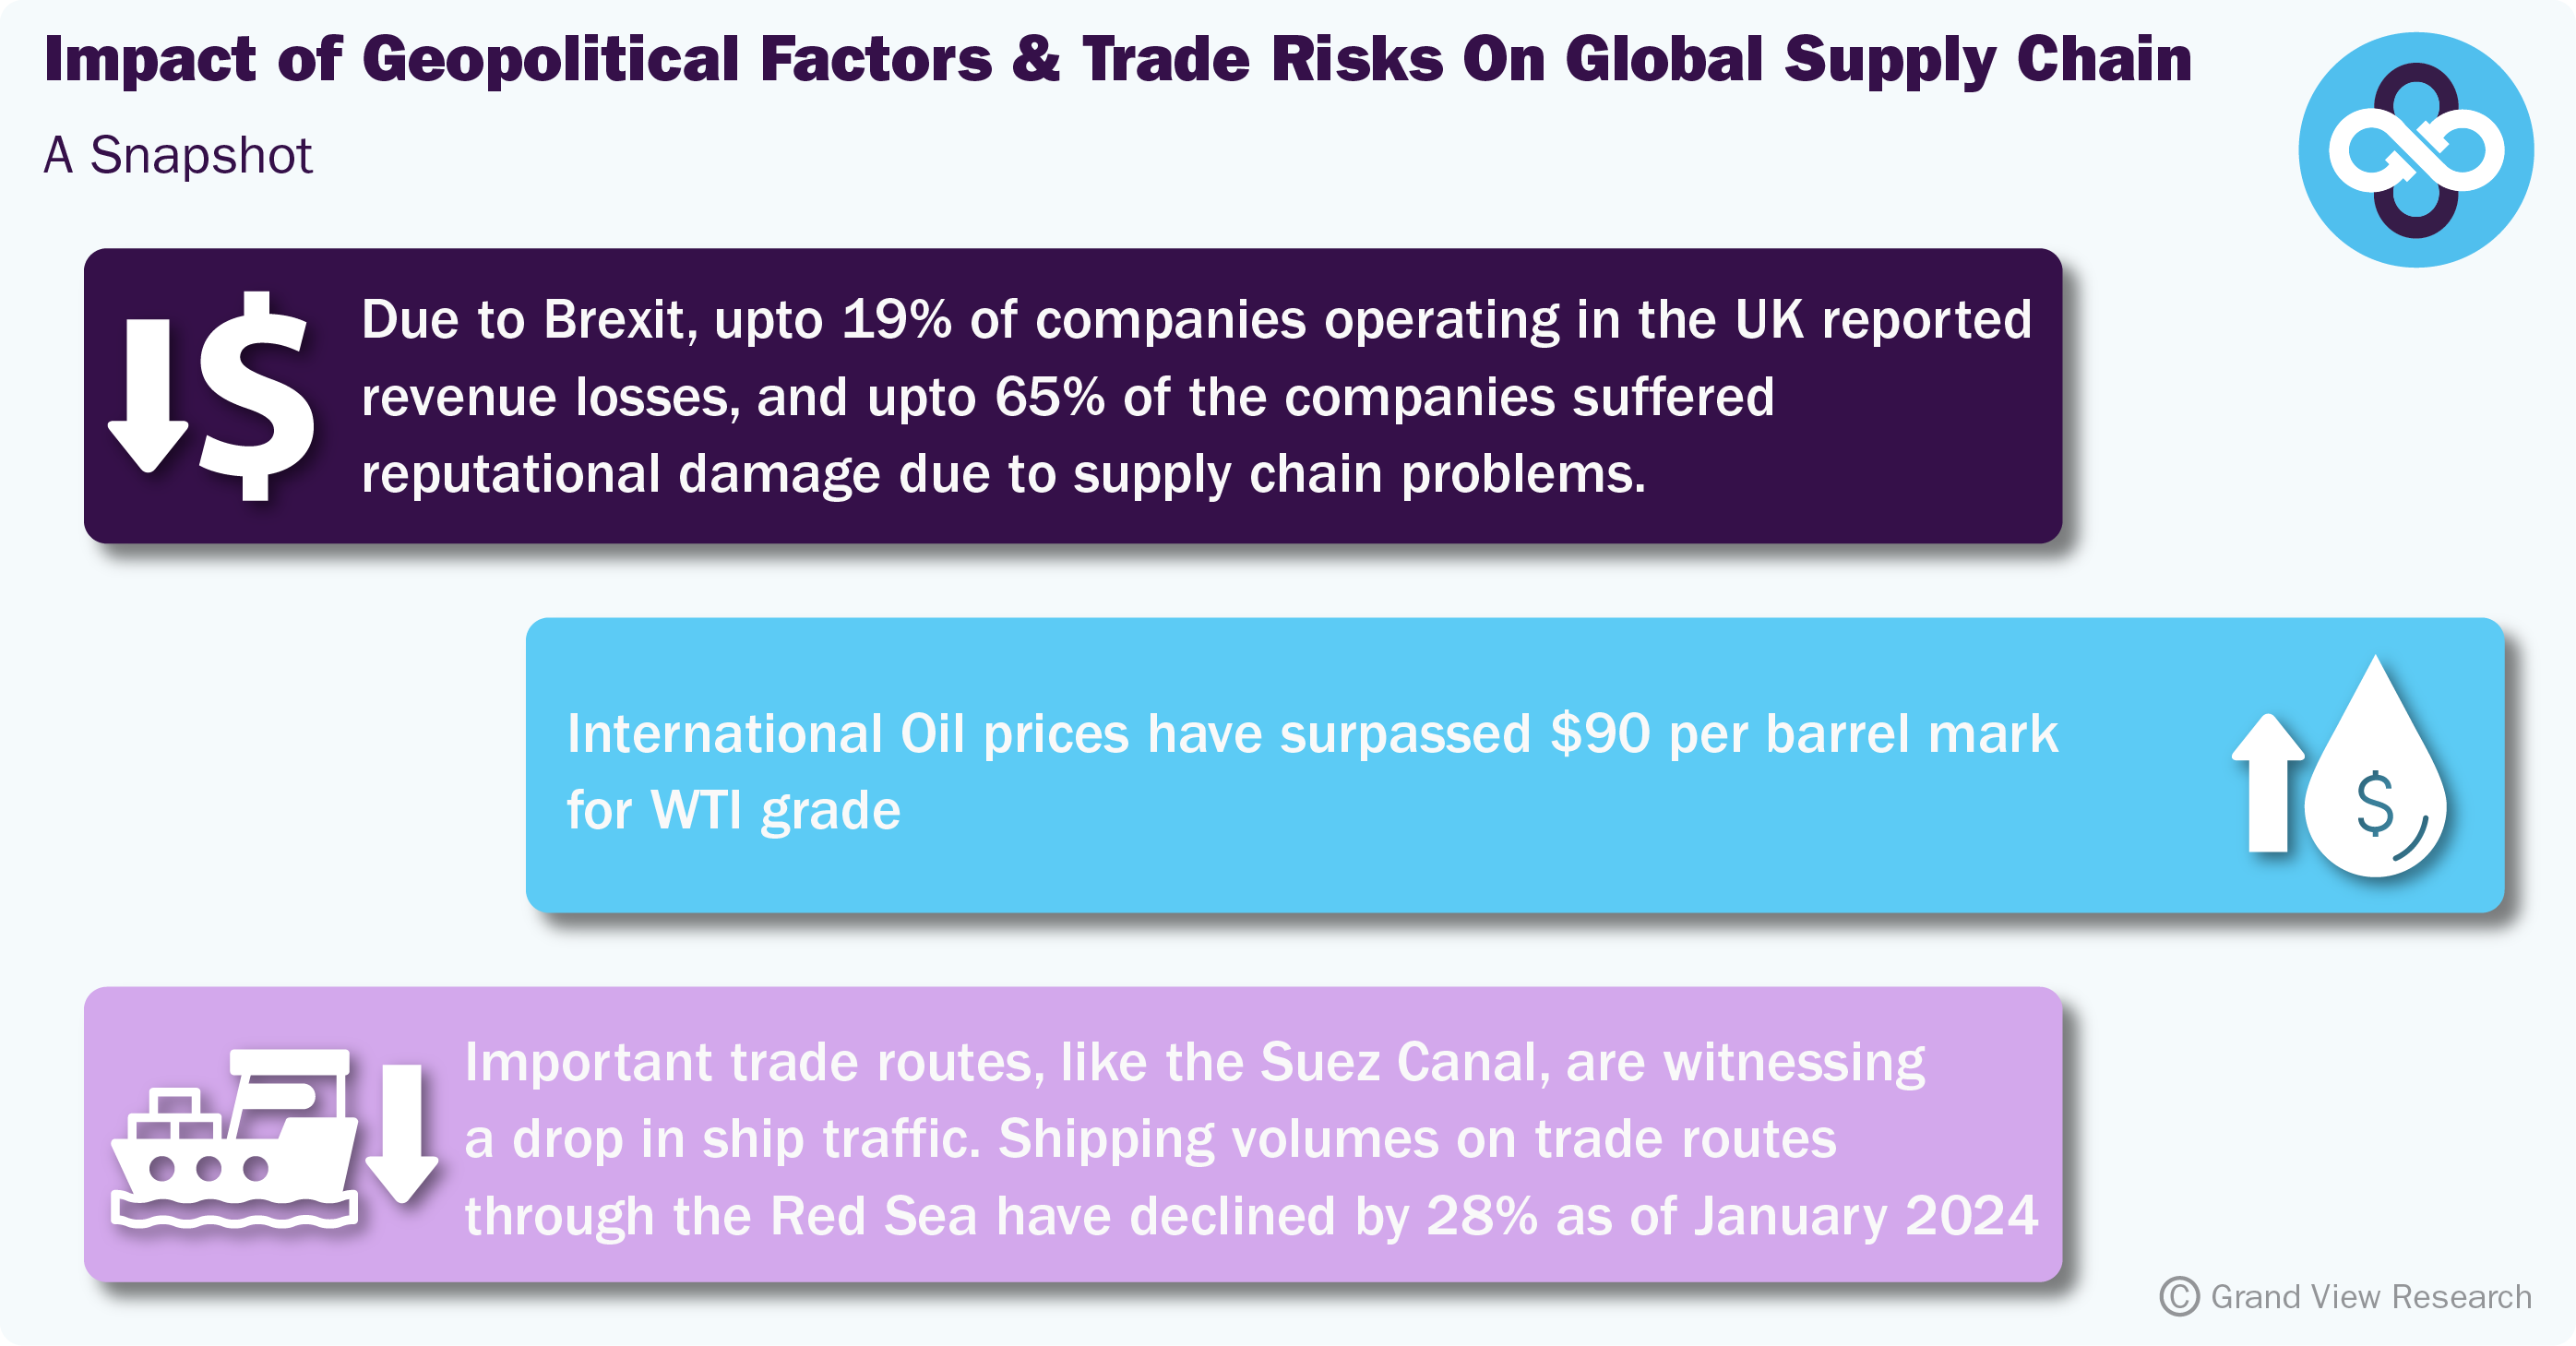 Impact of Geopolitical Factors & Trade Risks On Global Supply Chain - A Snapshot